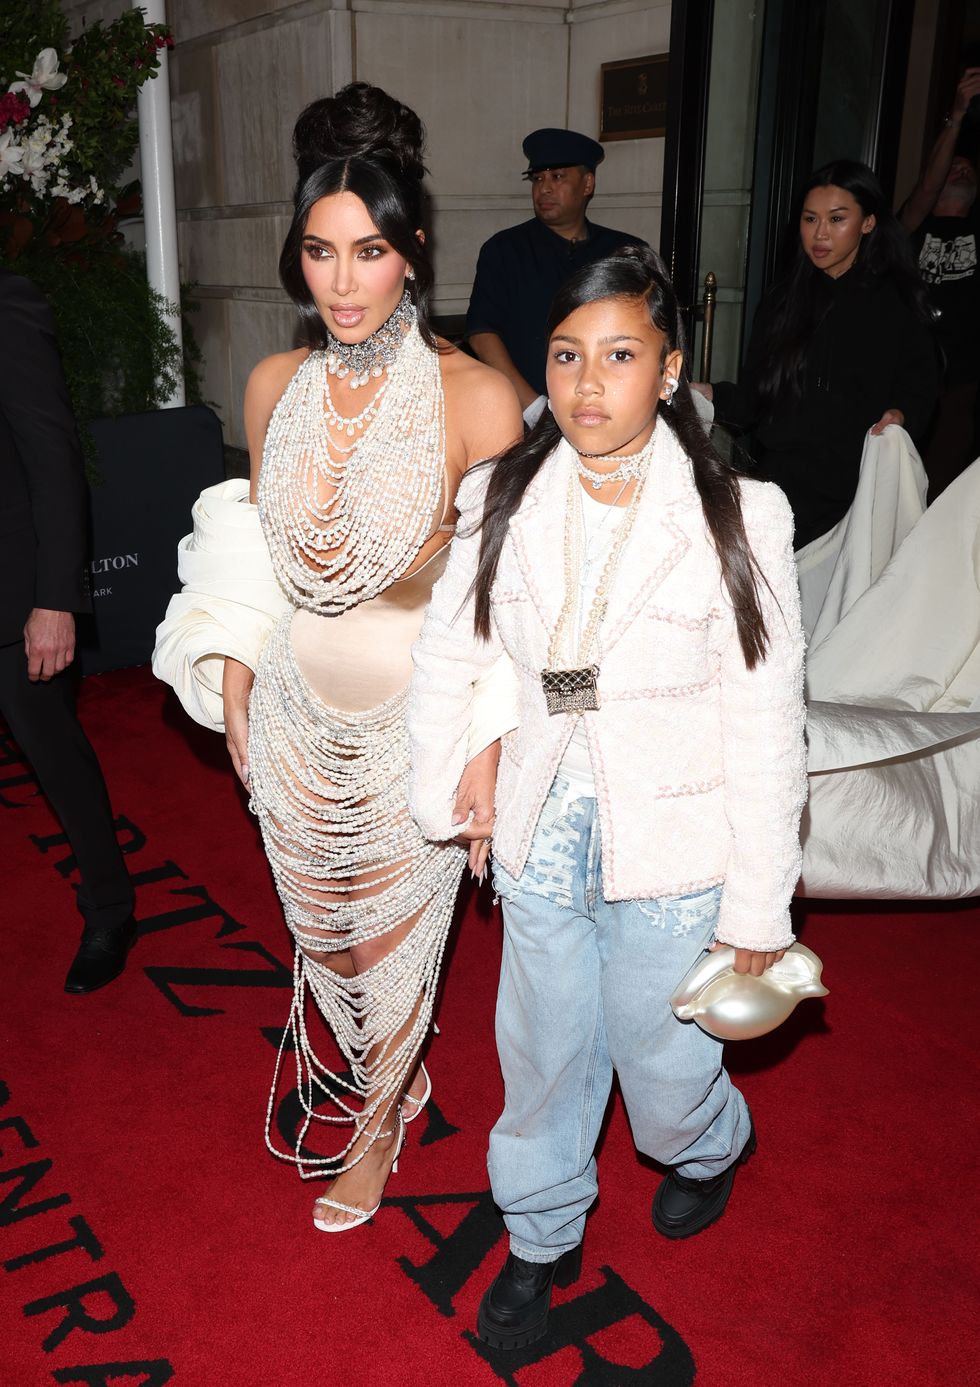 North West Got a FrontRow View of Kim Kardashian Posing in Her Pearl